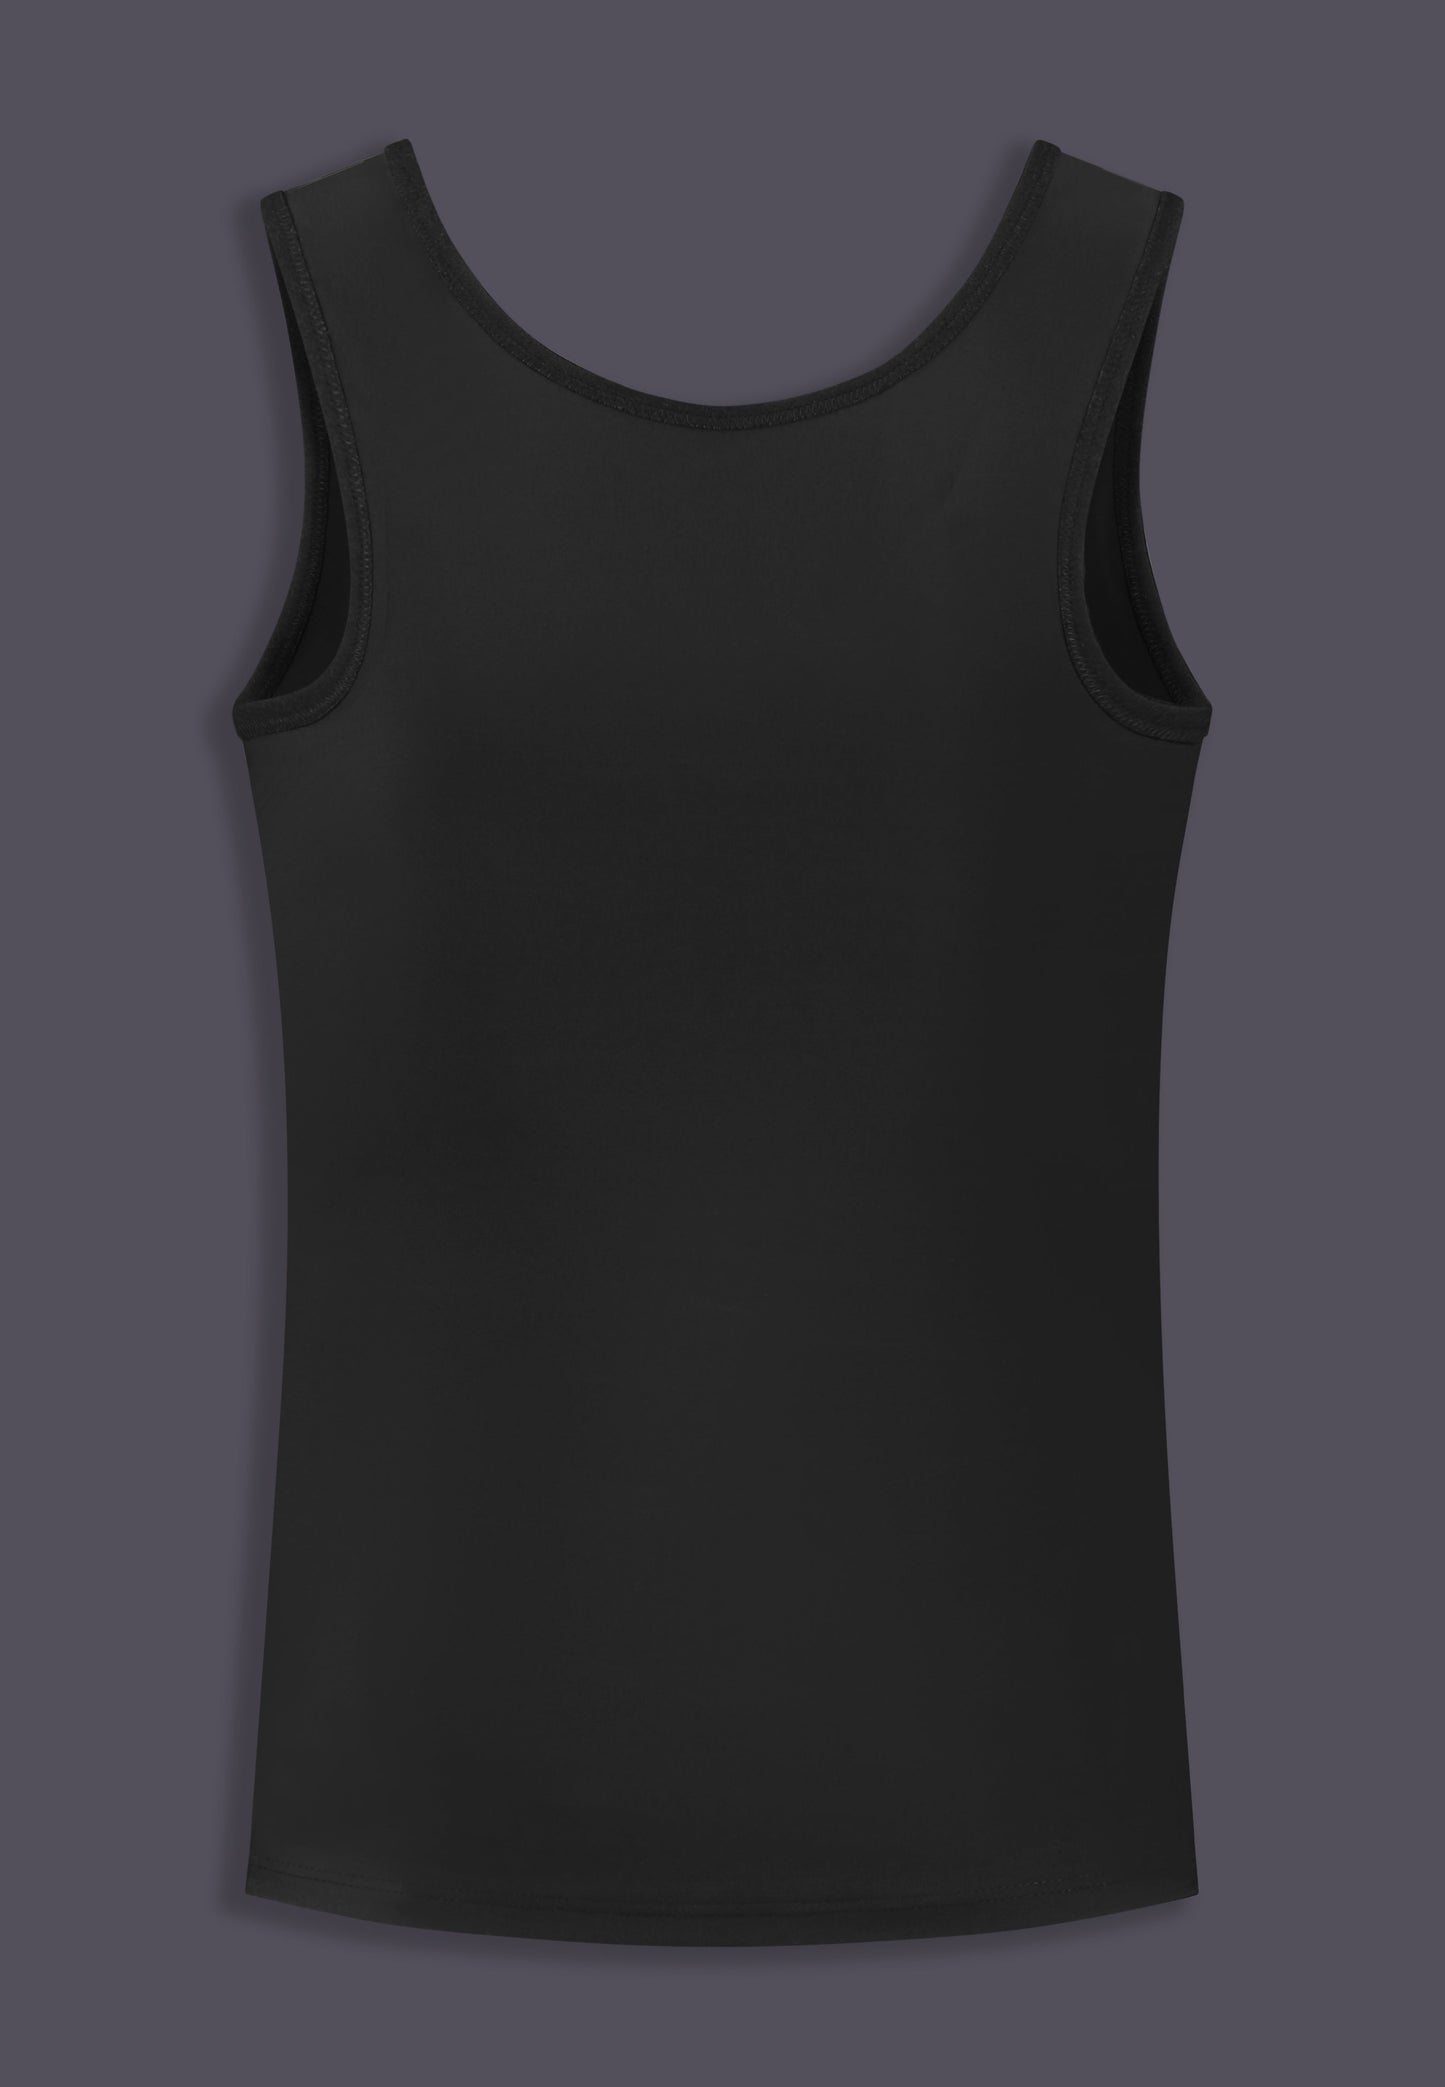 Swim Singlet Advanced black, back view of the item, by UNTAG